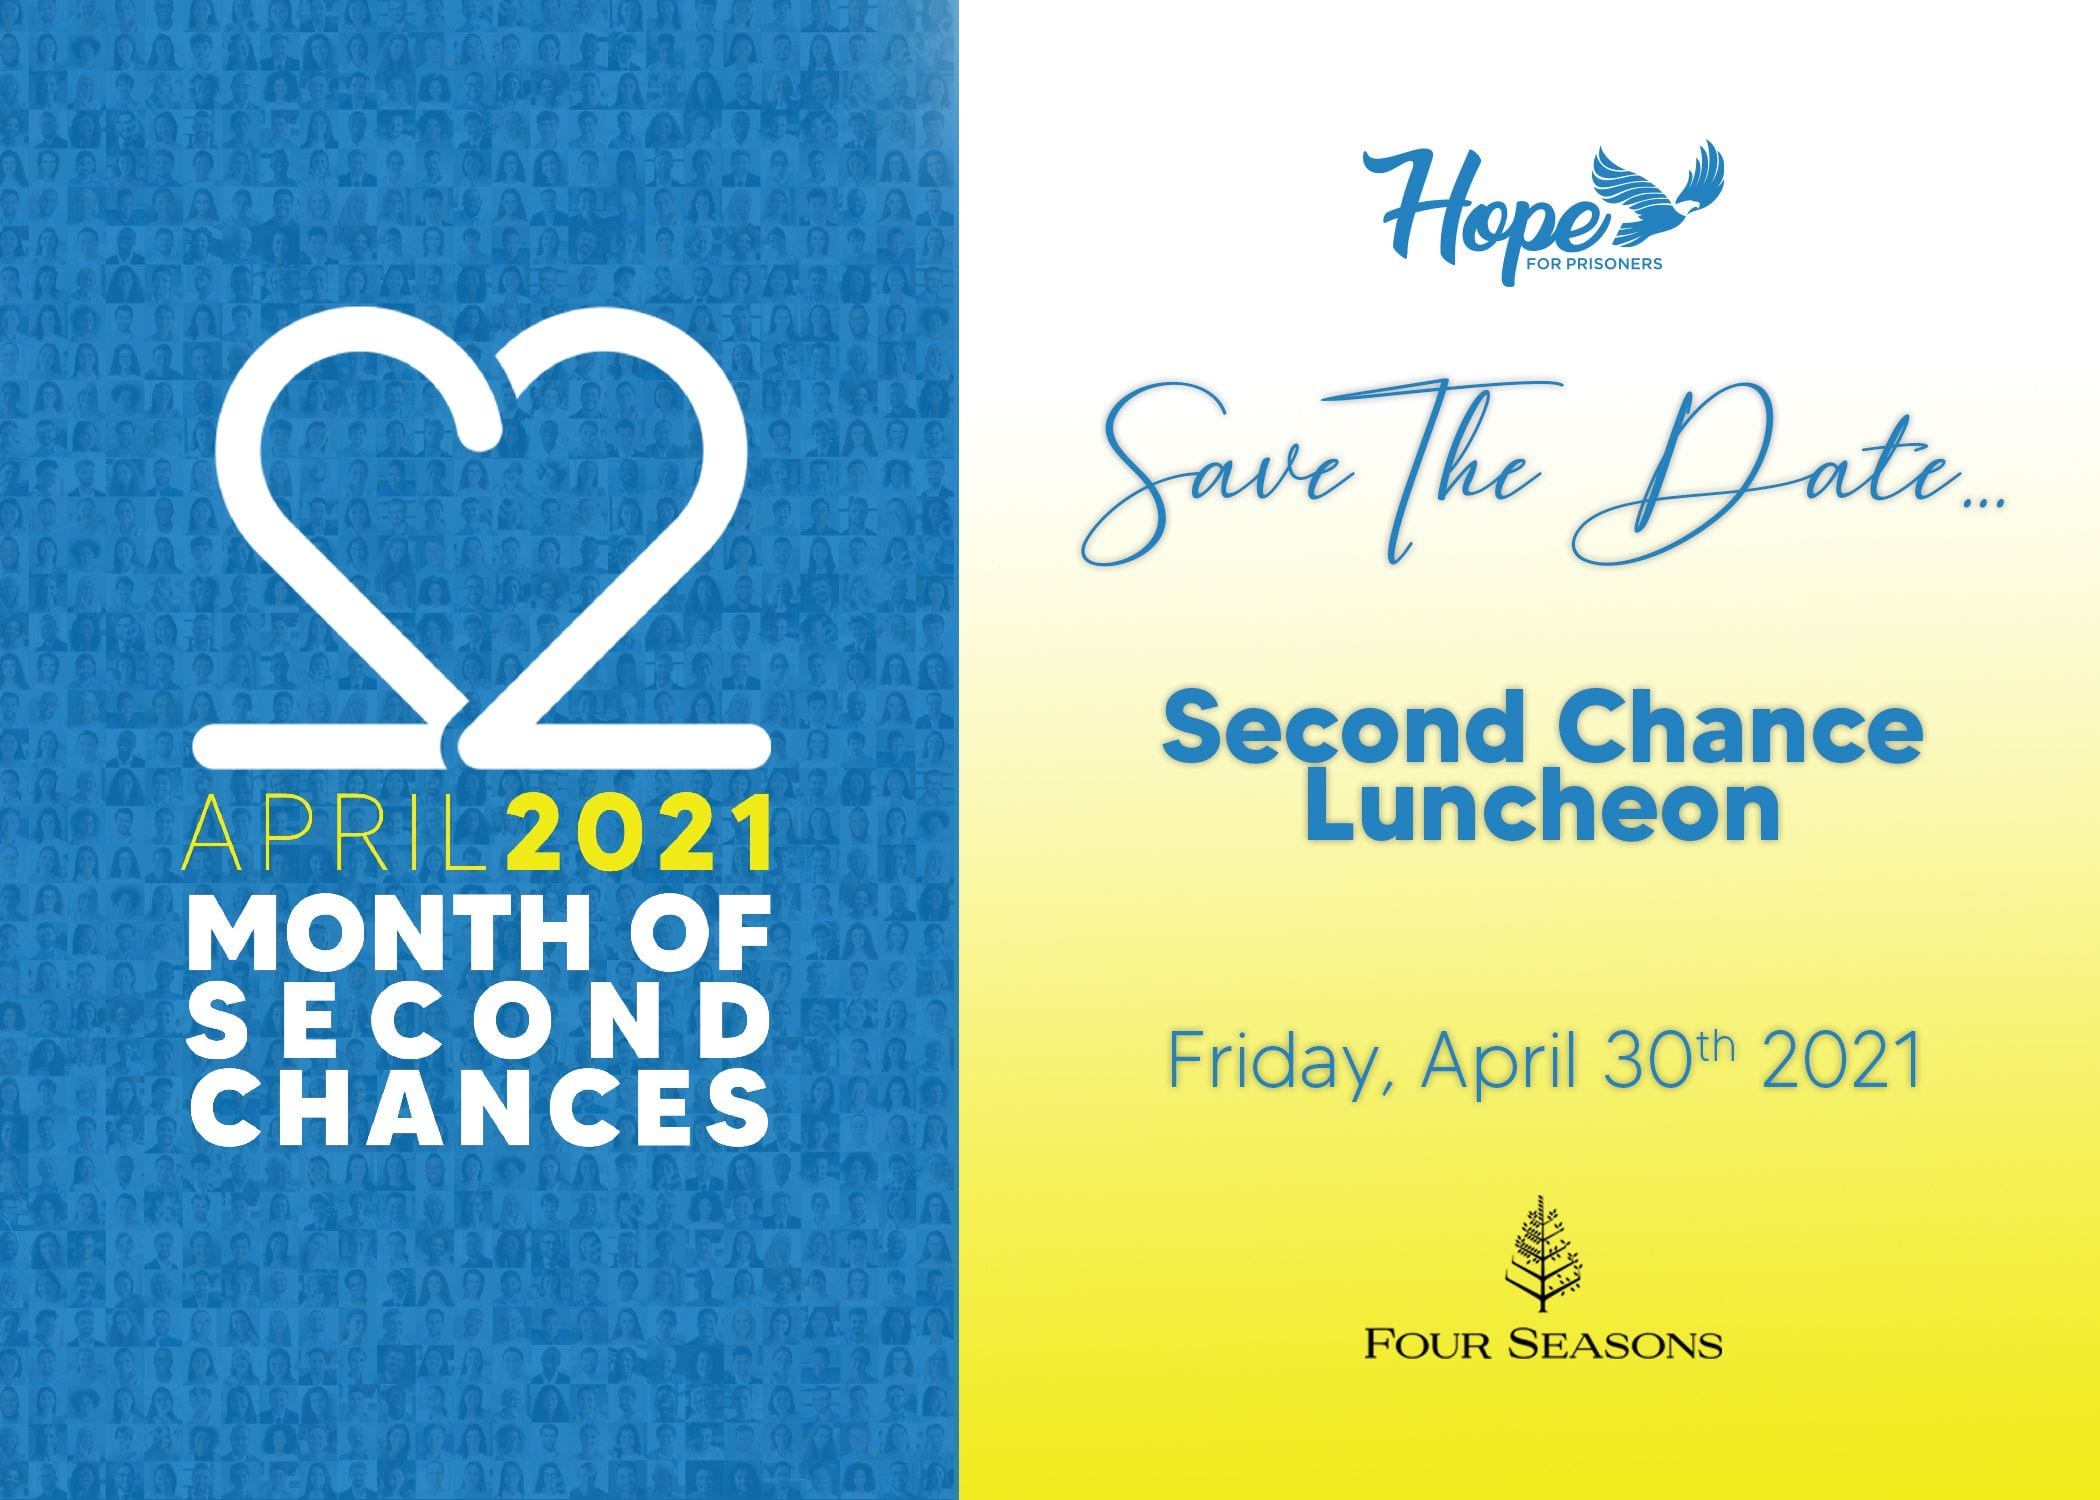 Second Chance Luncheon